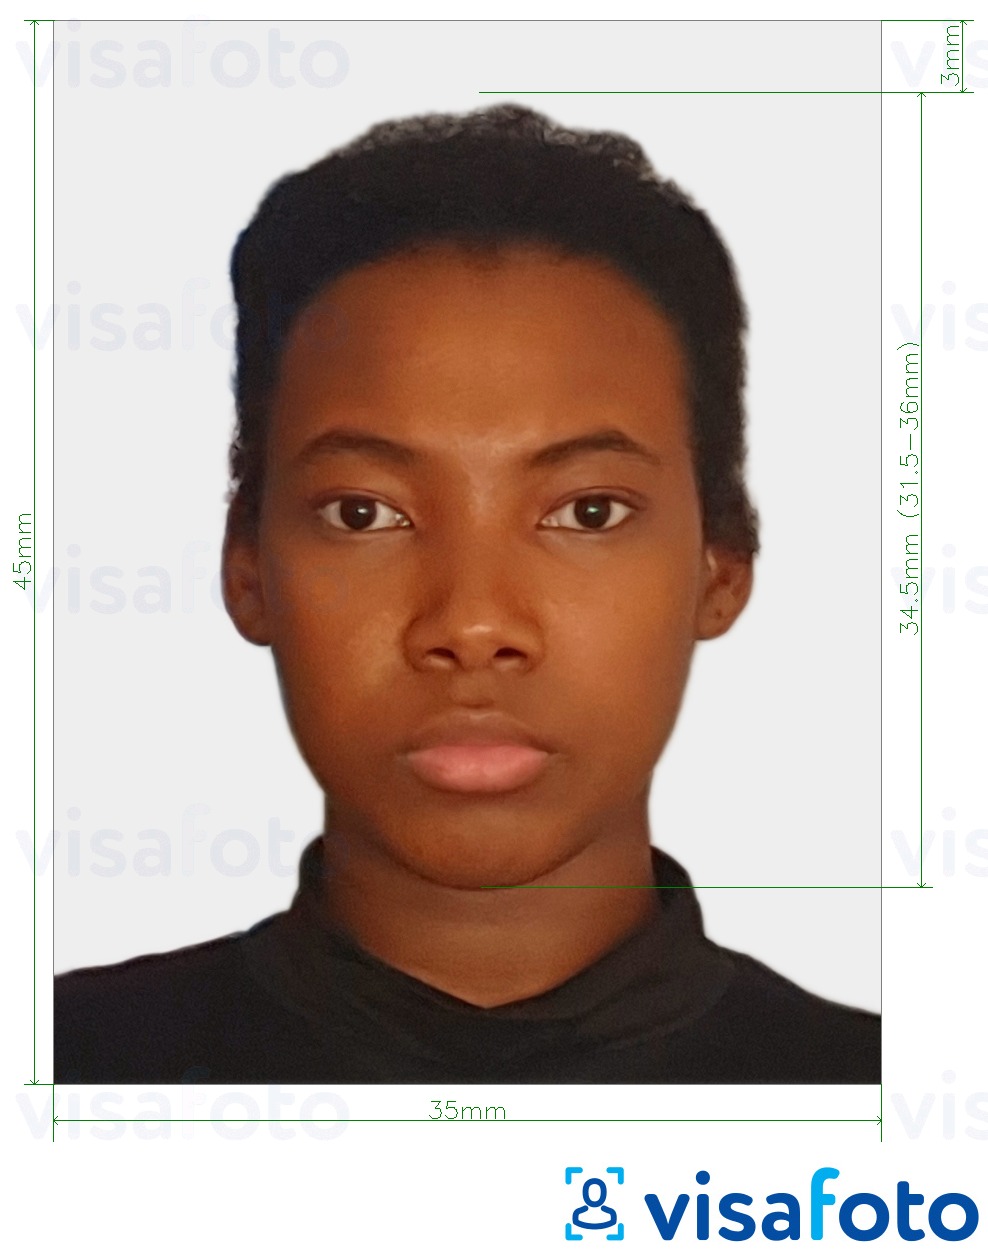 Example of photo for Suriname visa online with exact size specification